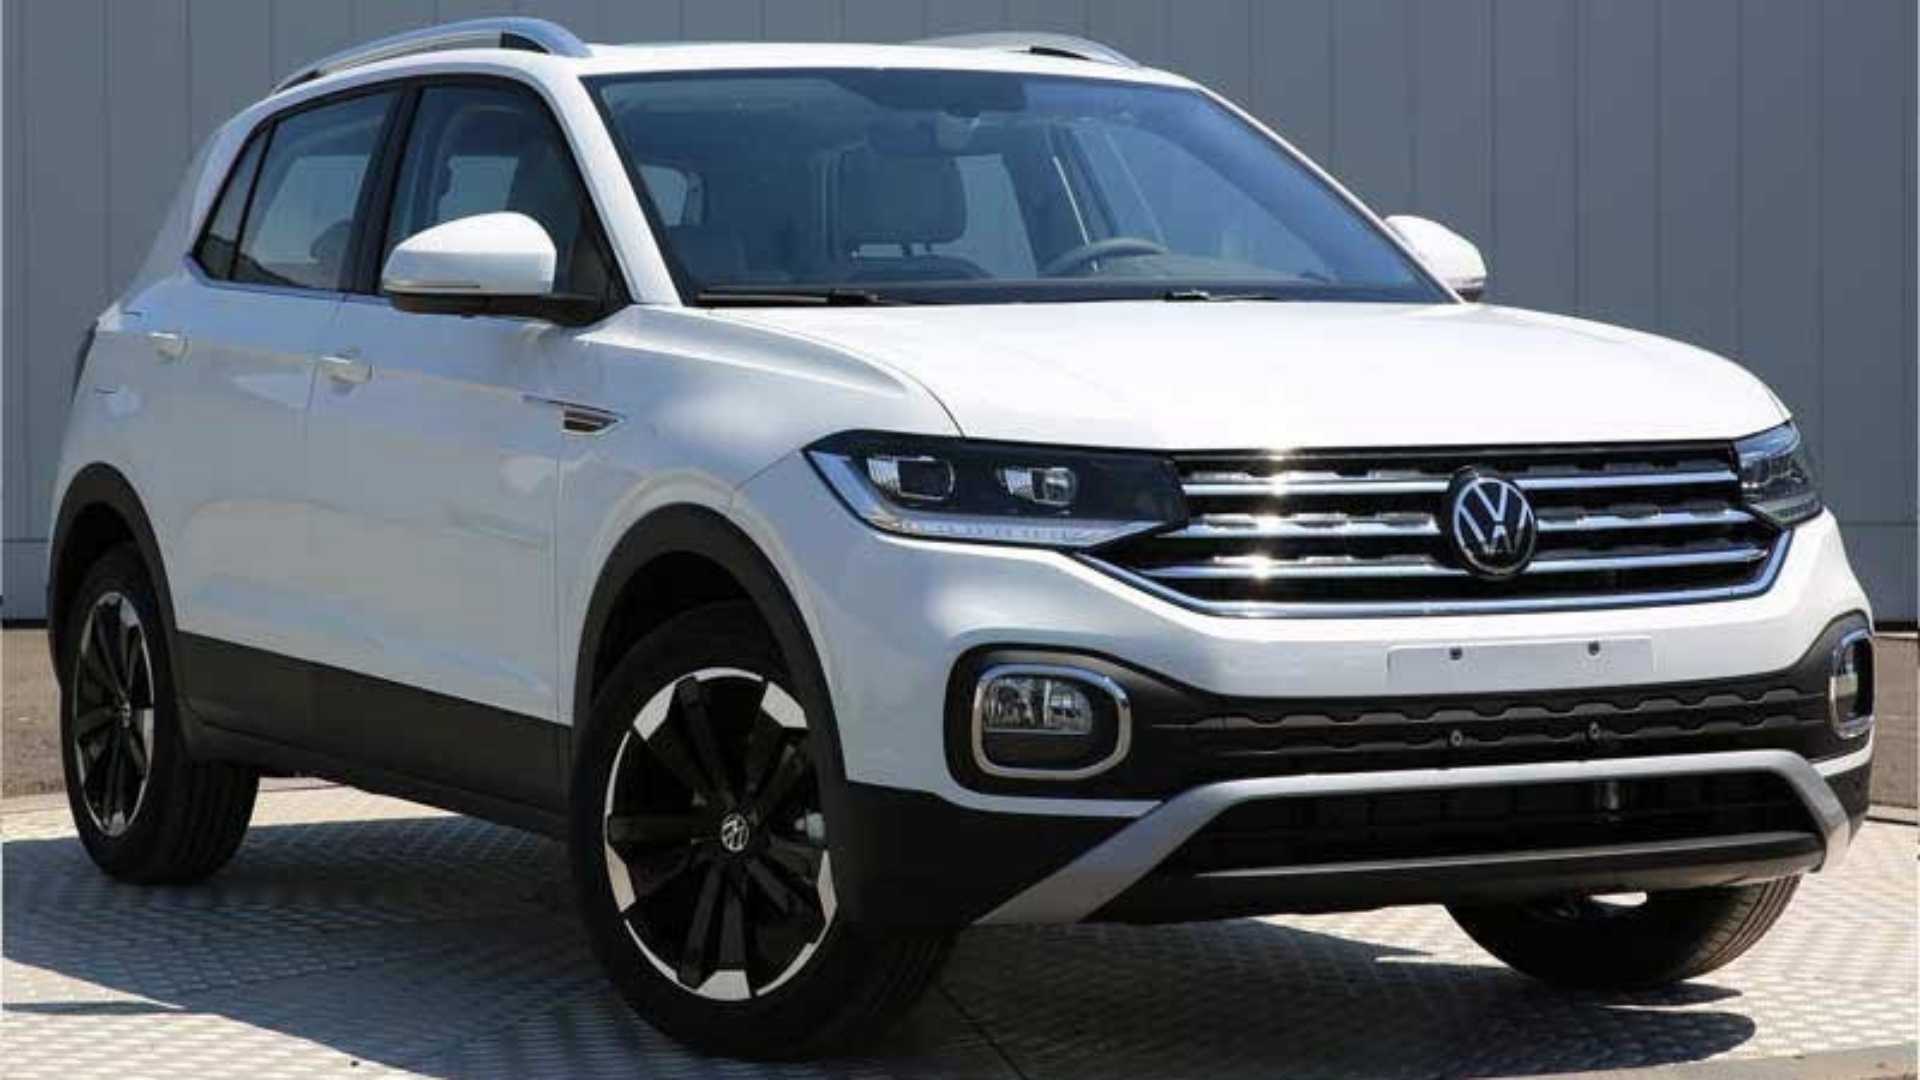 Volkswagen Tacqua is already being sold in Russia.  How much does an analog T-Cross cost?